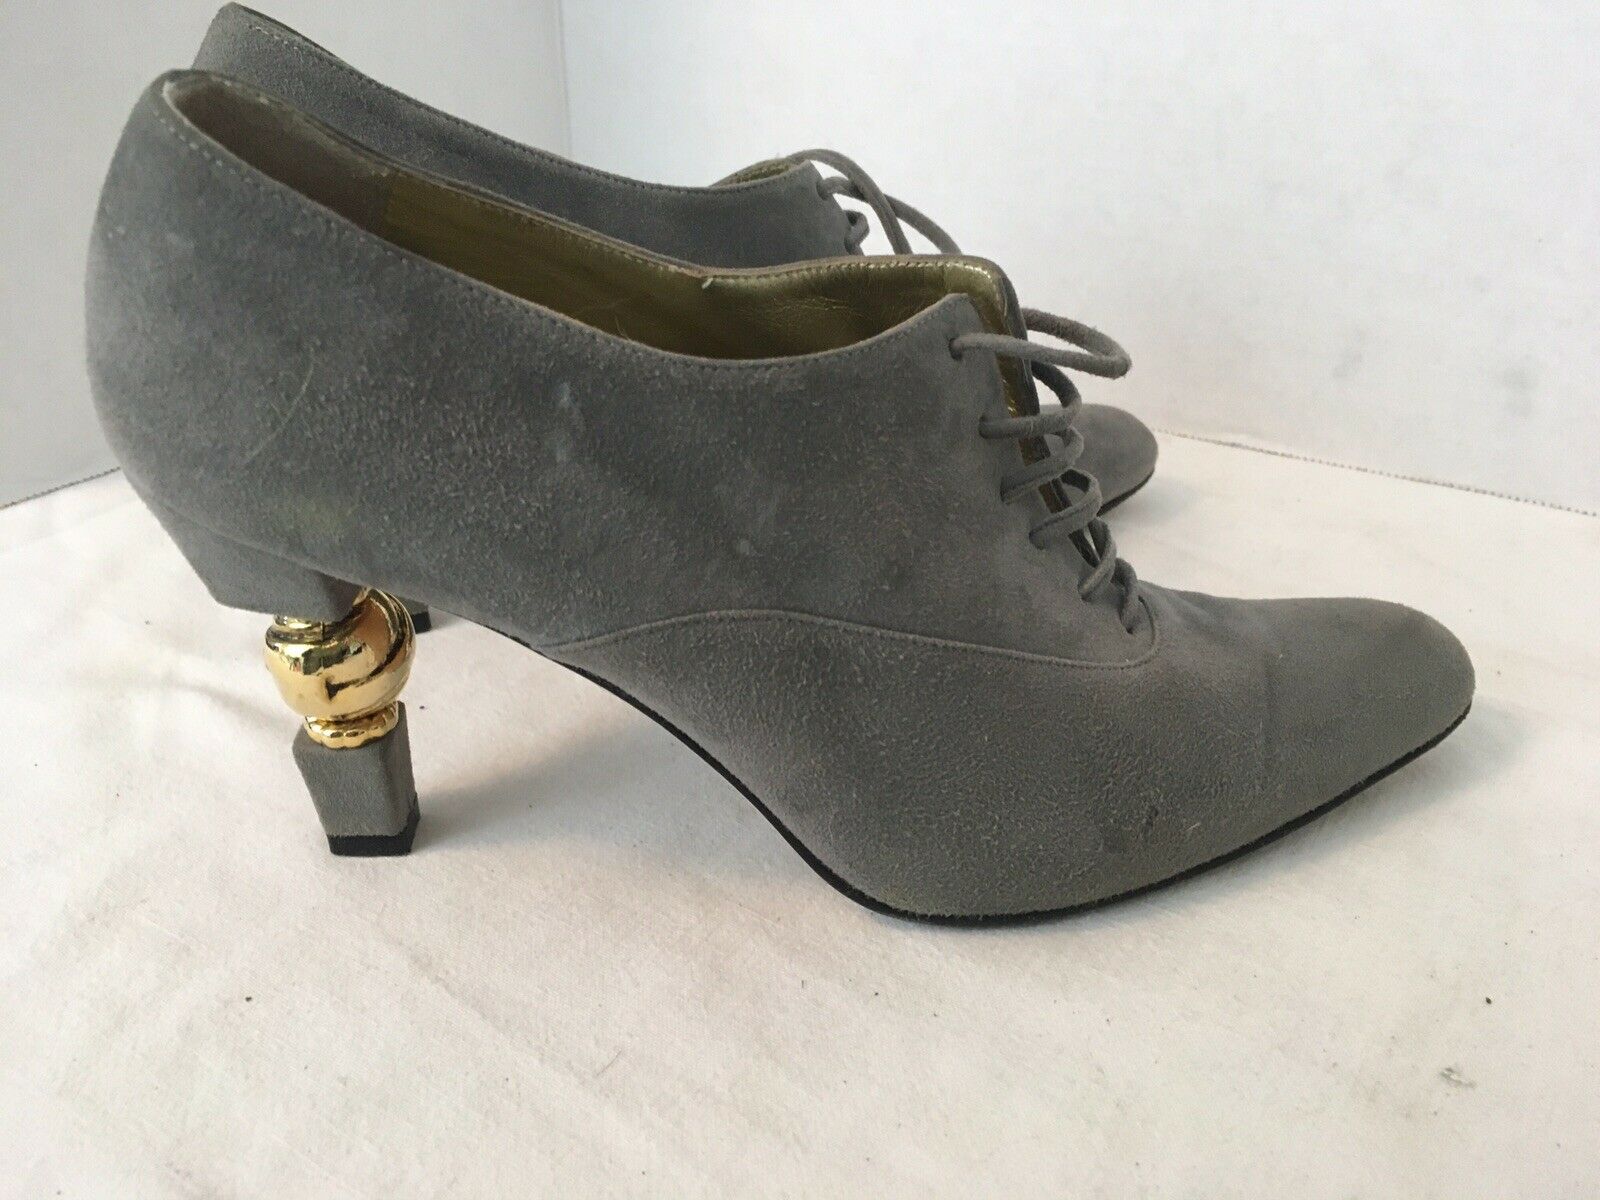 ESCADA Women's Gray Suede Heel Shoes with Gold Heel Inserts Size 6.5B